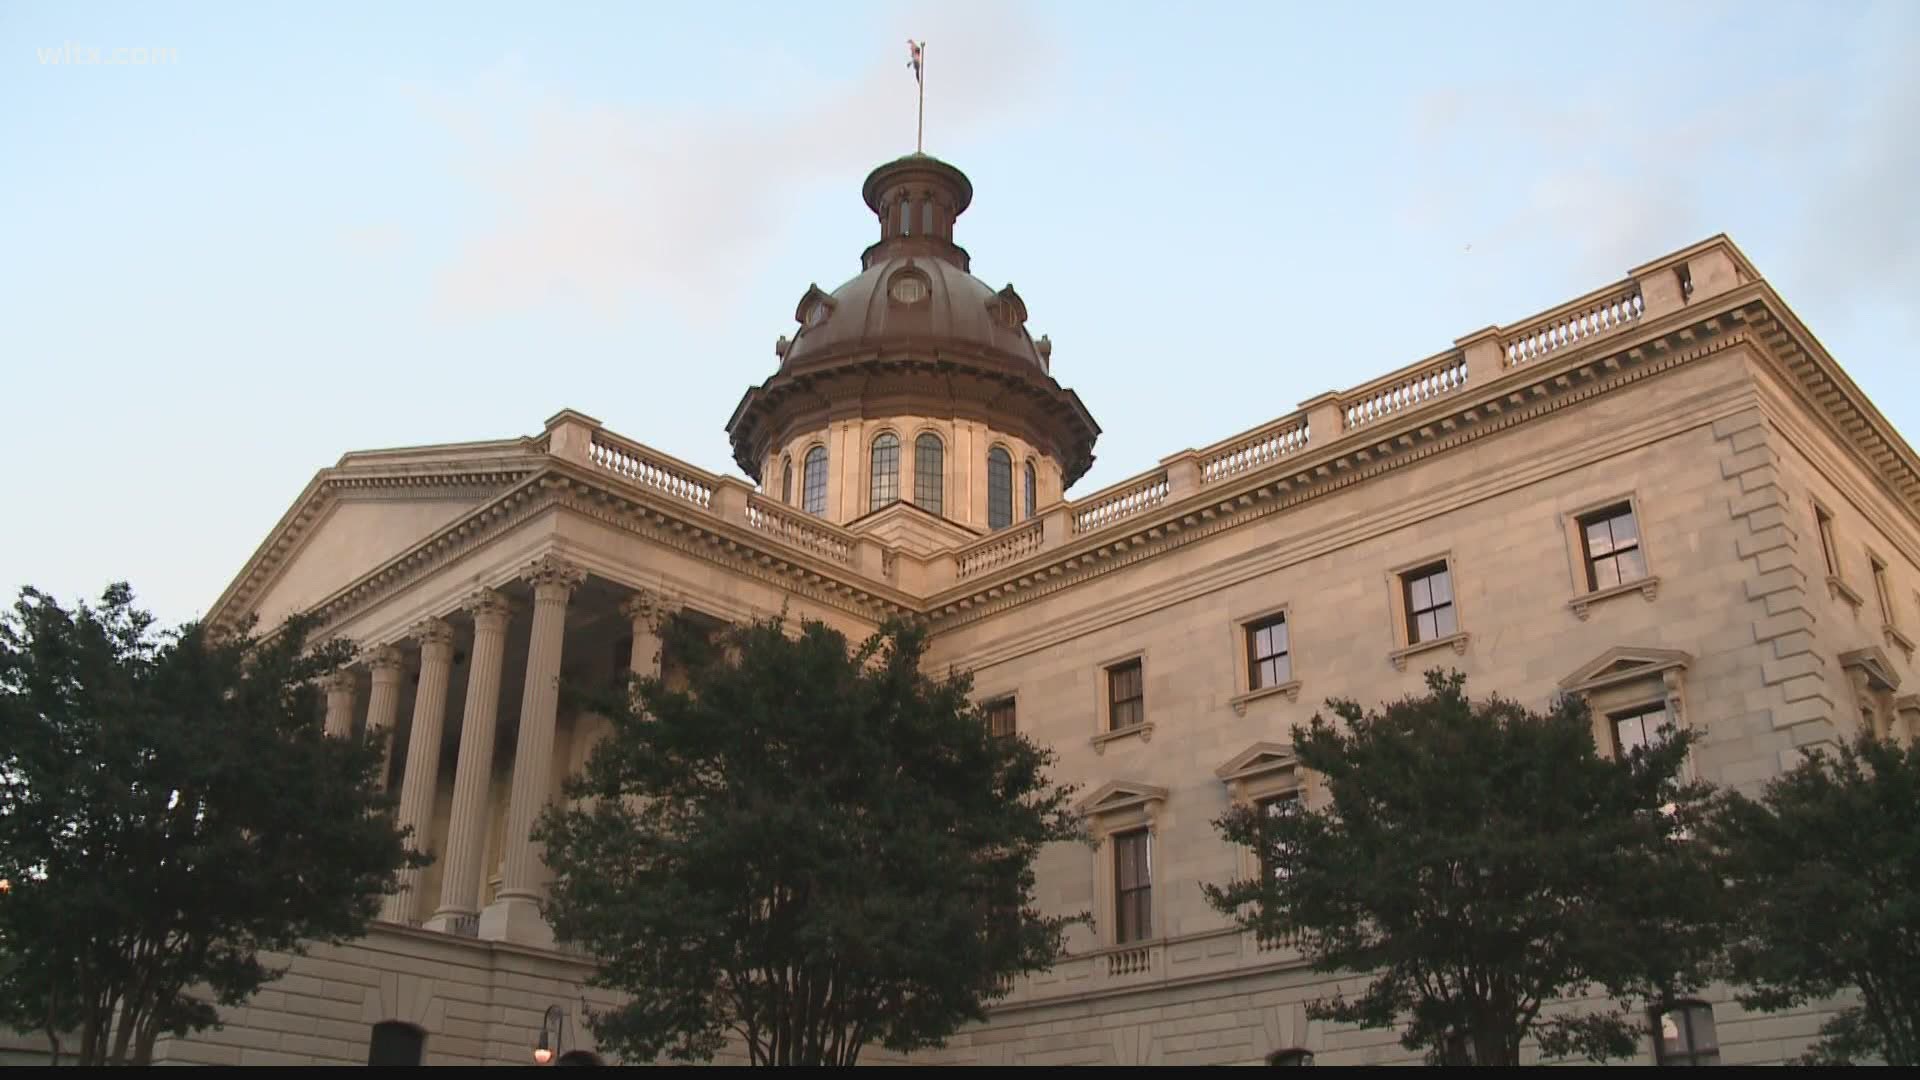 The South Carolina Senate is being called back into session to deal with possible changes for the November elections amid coronavirus concerns.